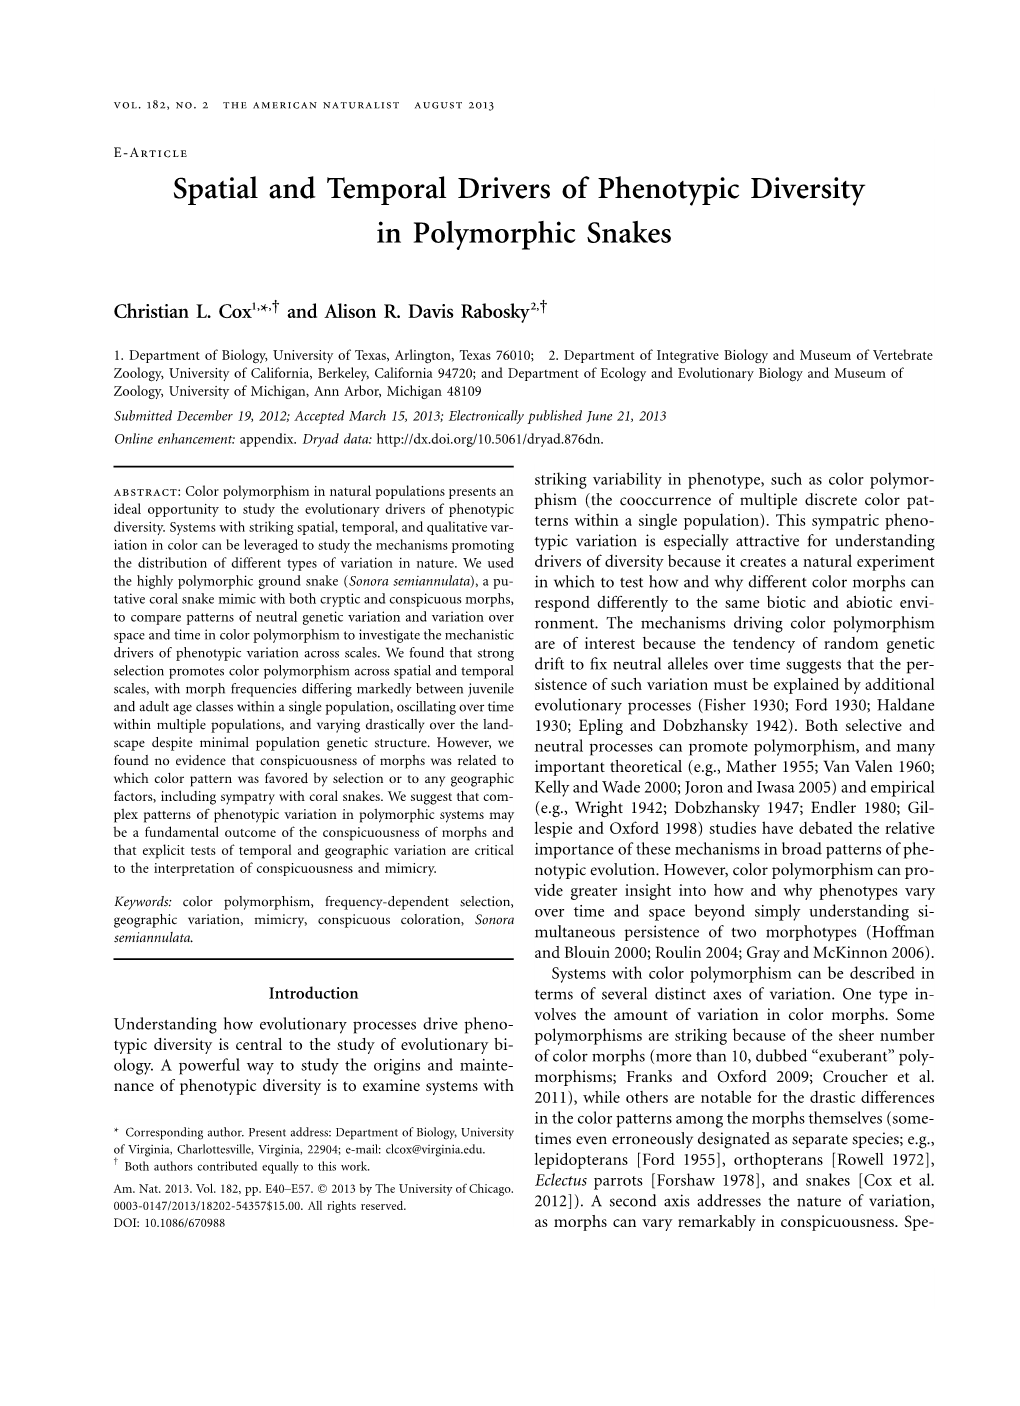 Spatial and Temporal Drivers of Phenotypic Diversity in Polymorphic Snakes